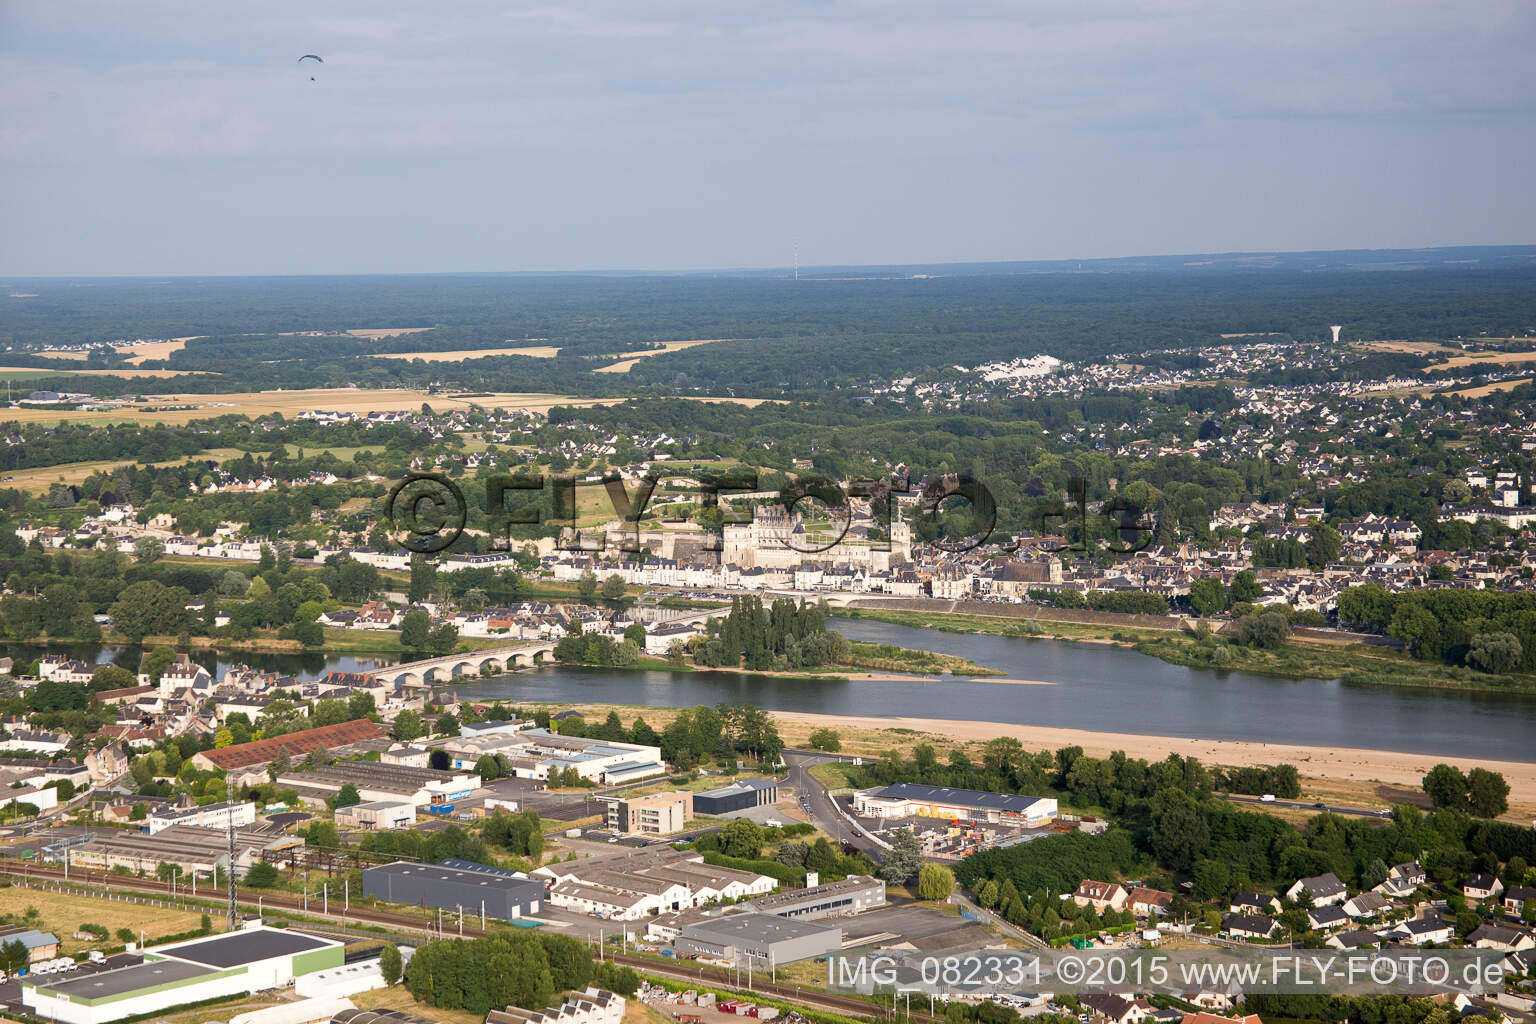 Aerial view of Amboise in the state Indre et Loire, France